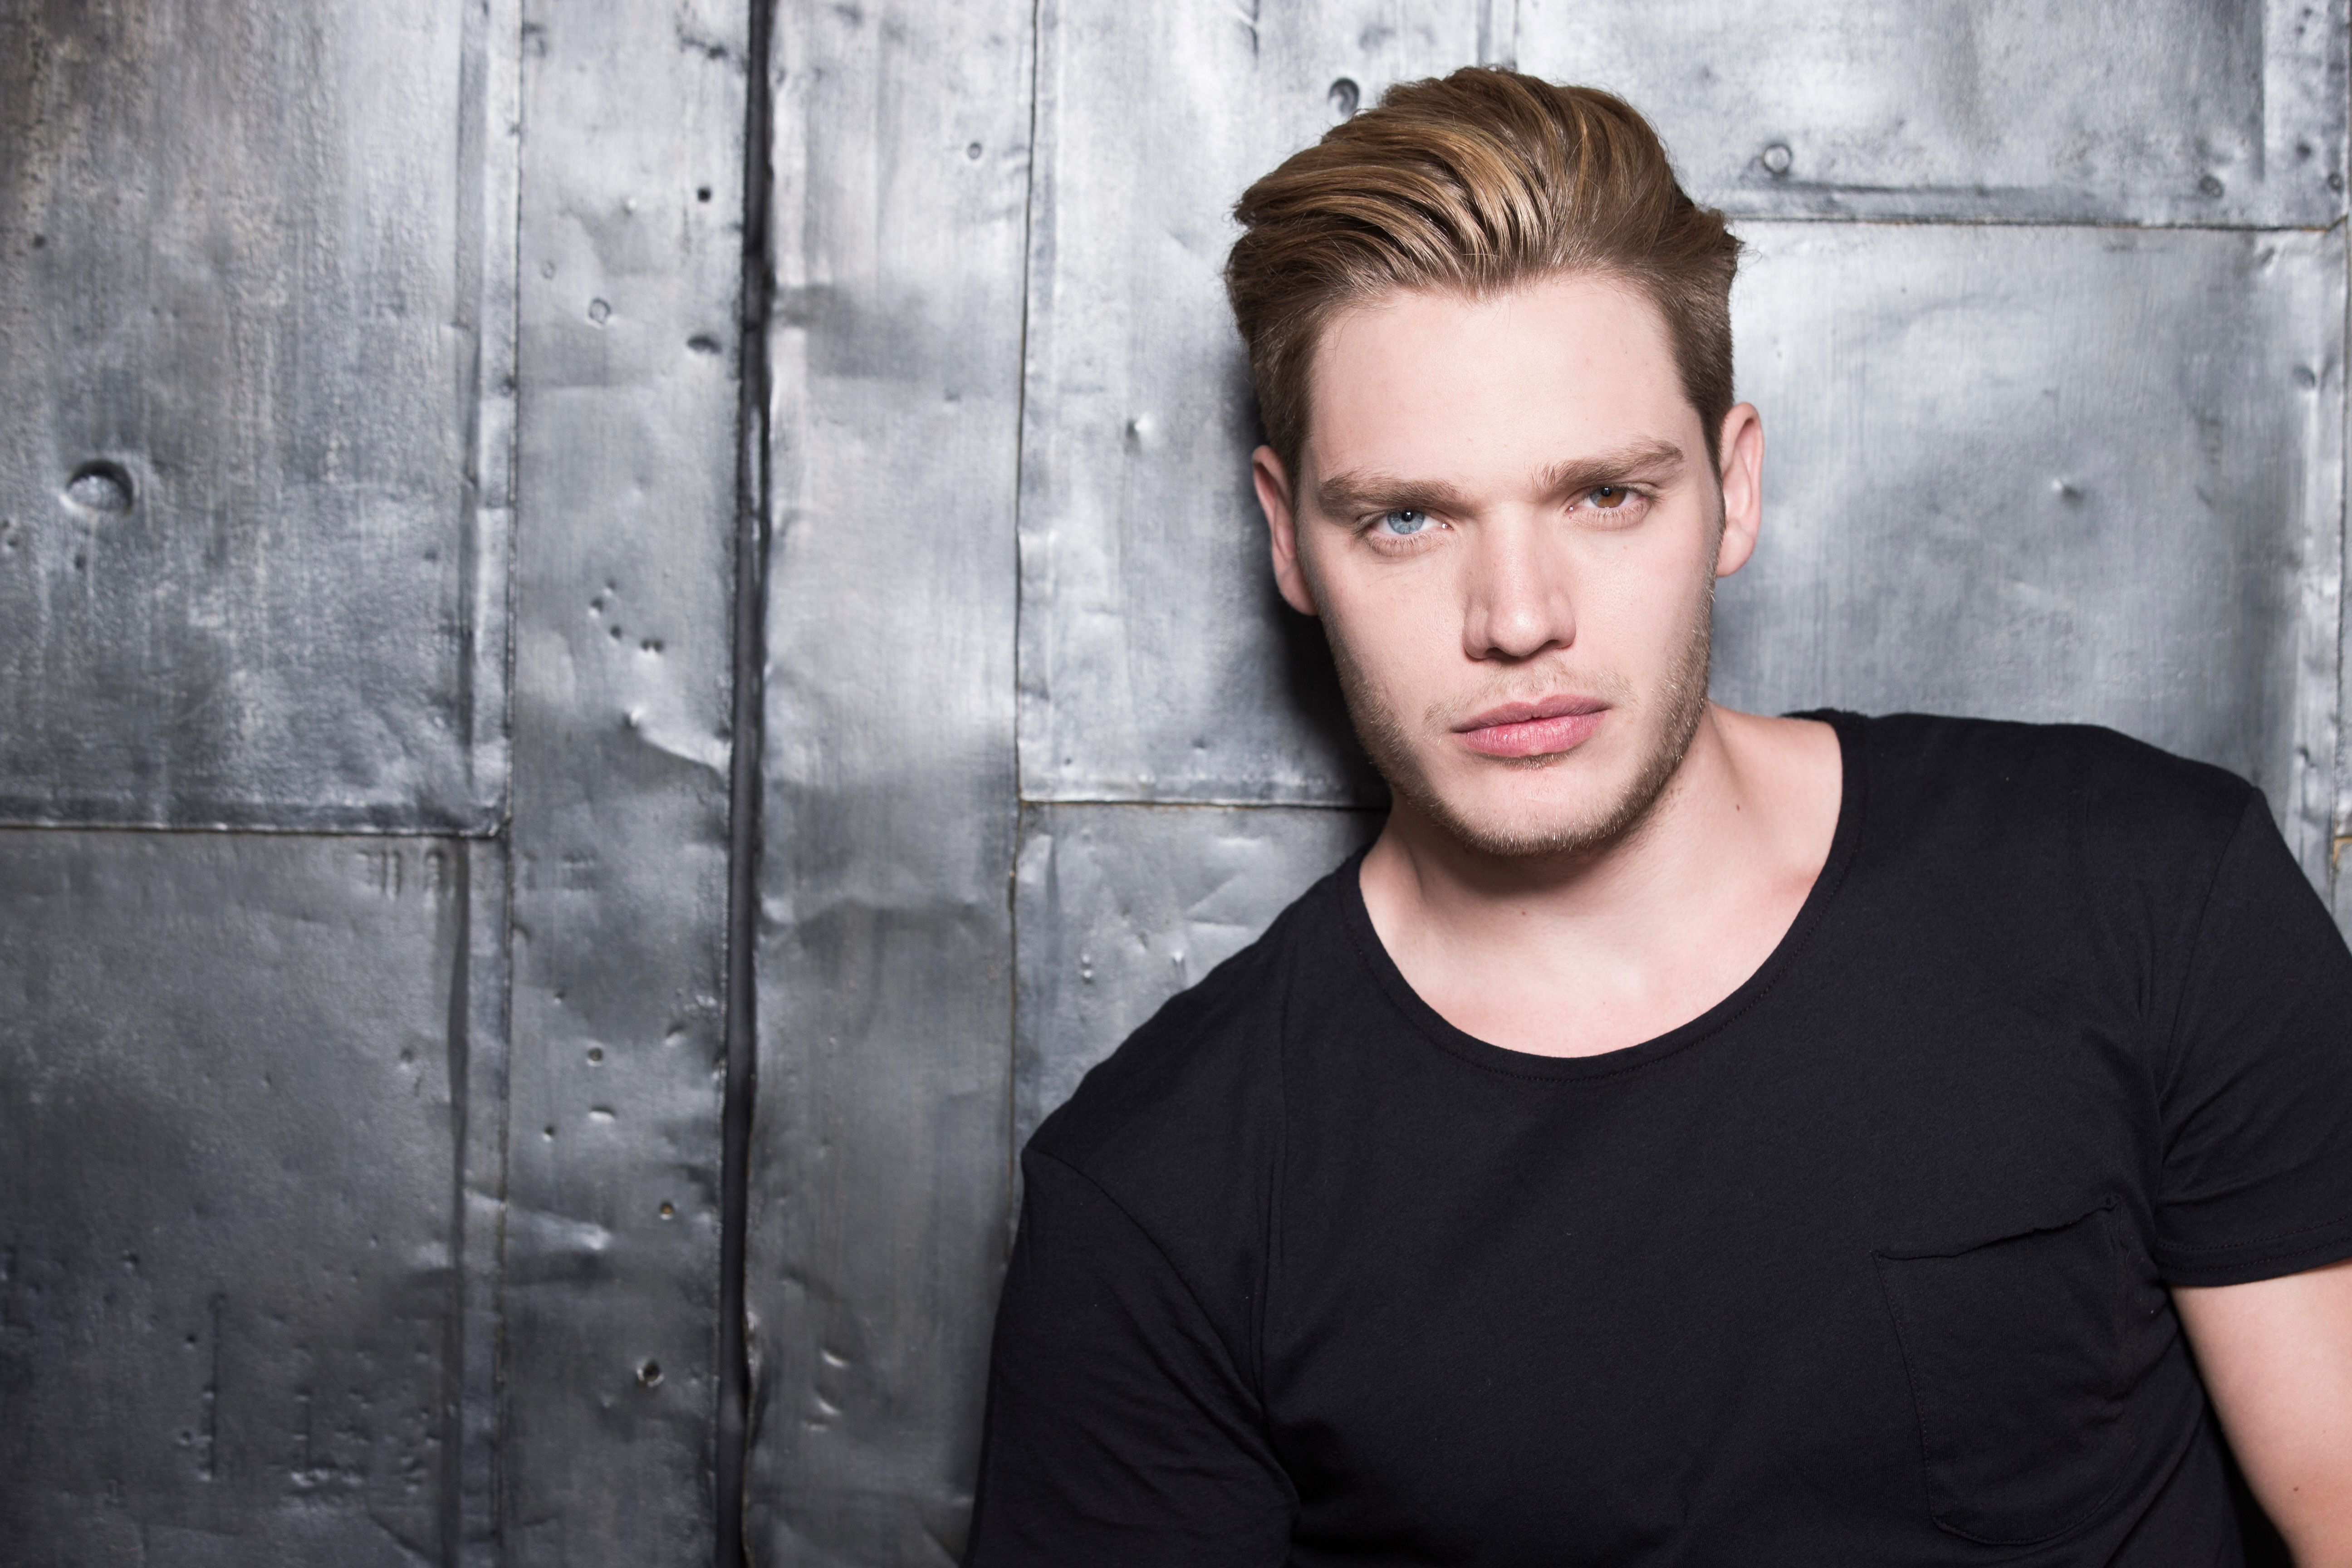 Shadowhunters: Dominic Sherwood On Playing A Jace The 'Mind Blowing